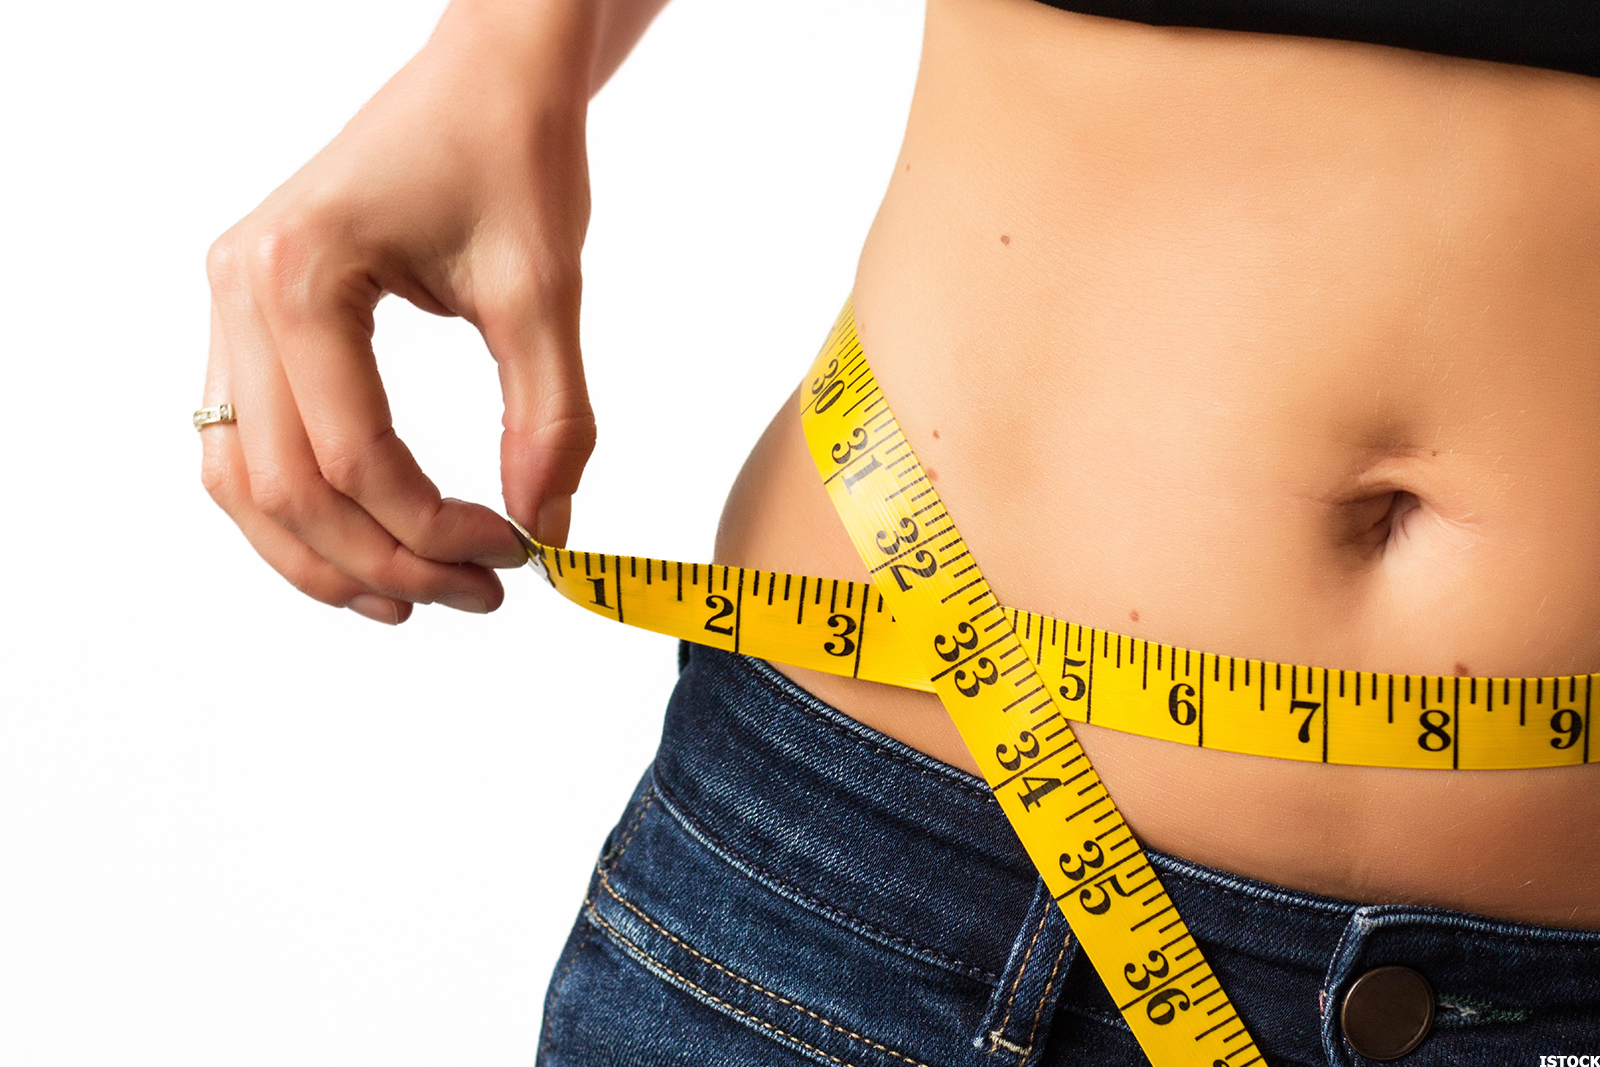 New Year's Resolution Season Busy Time for Weight-Loss Industry, Says ...